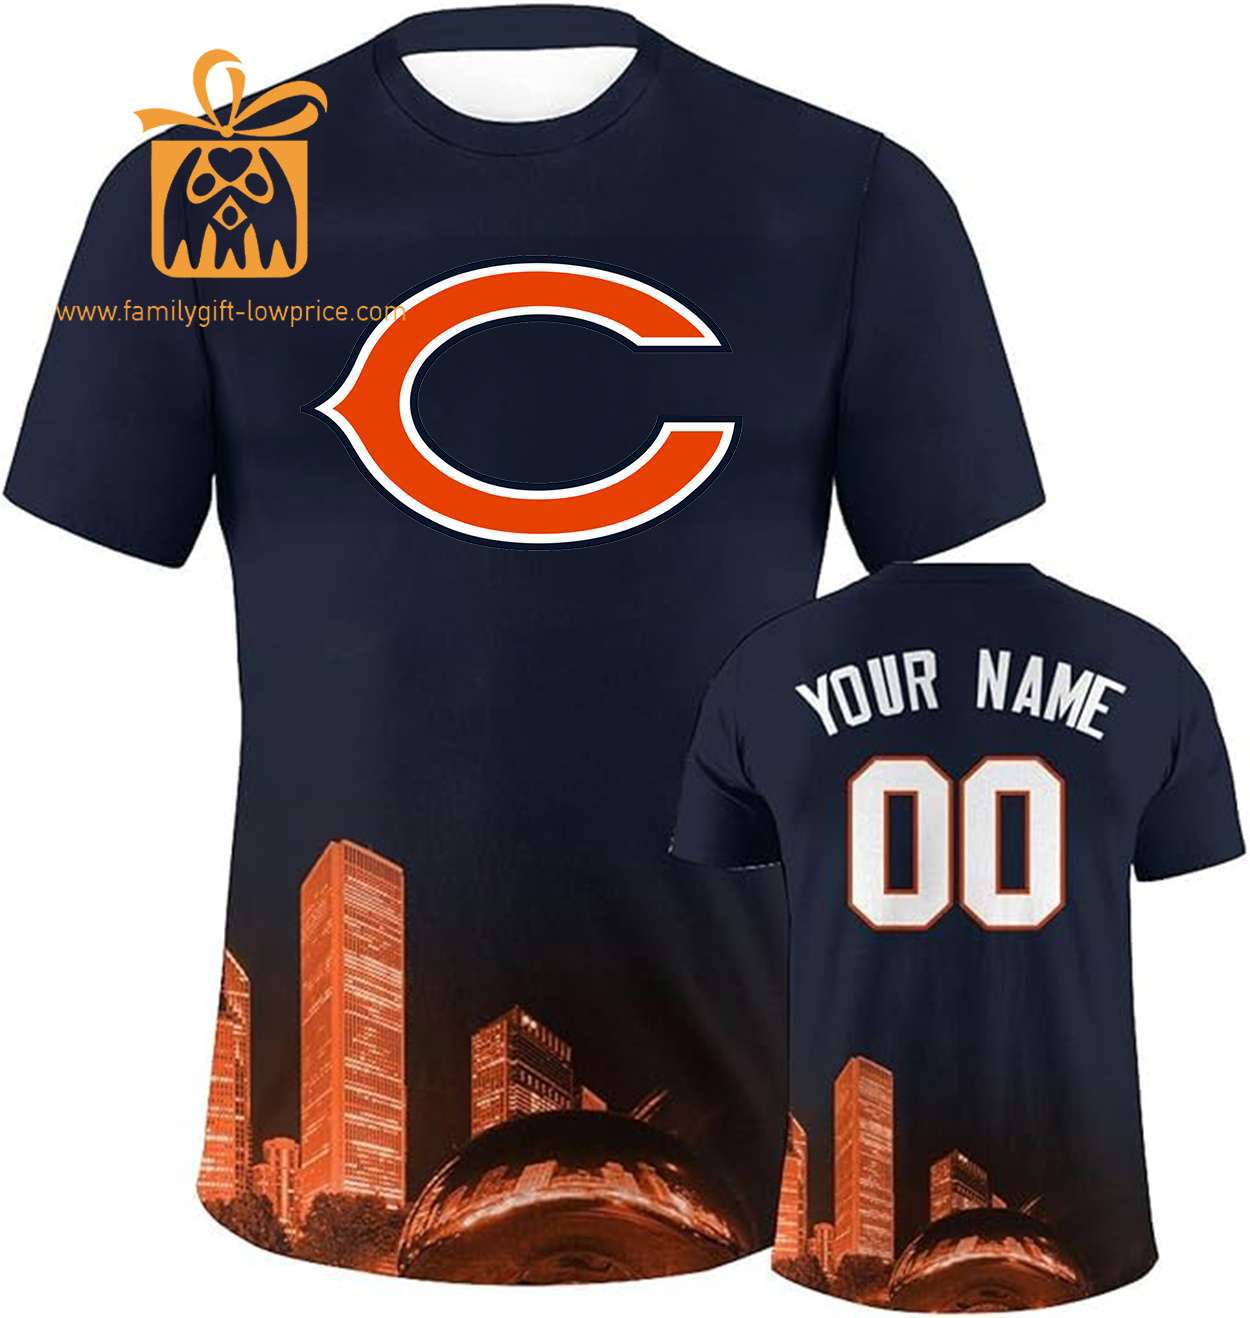 Chicago Bears Custom Football Shirts – Personalized Name & Number, Ideal for Fans